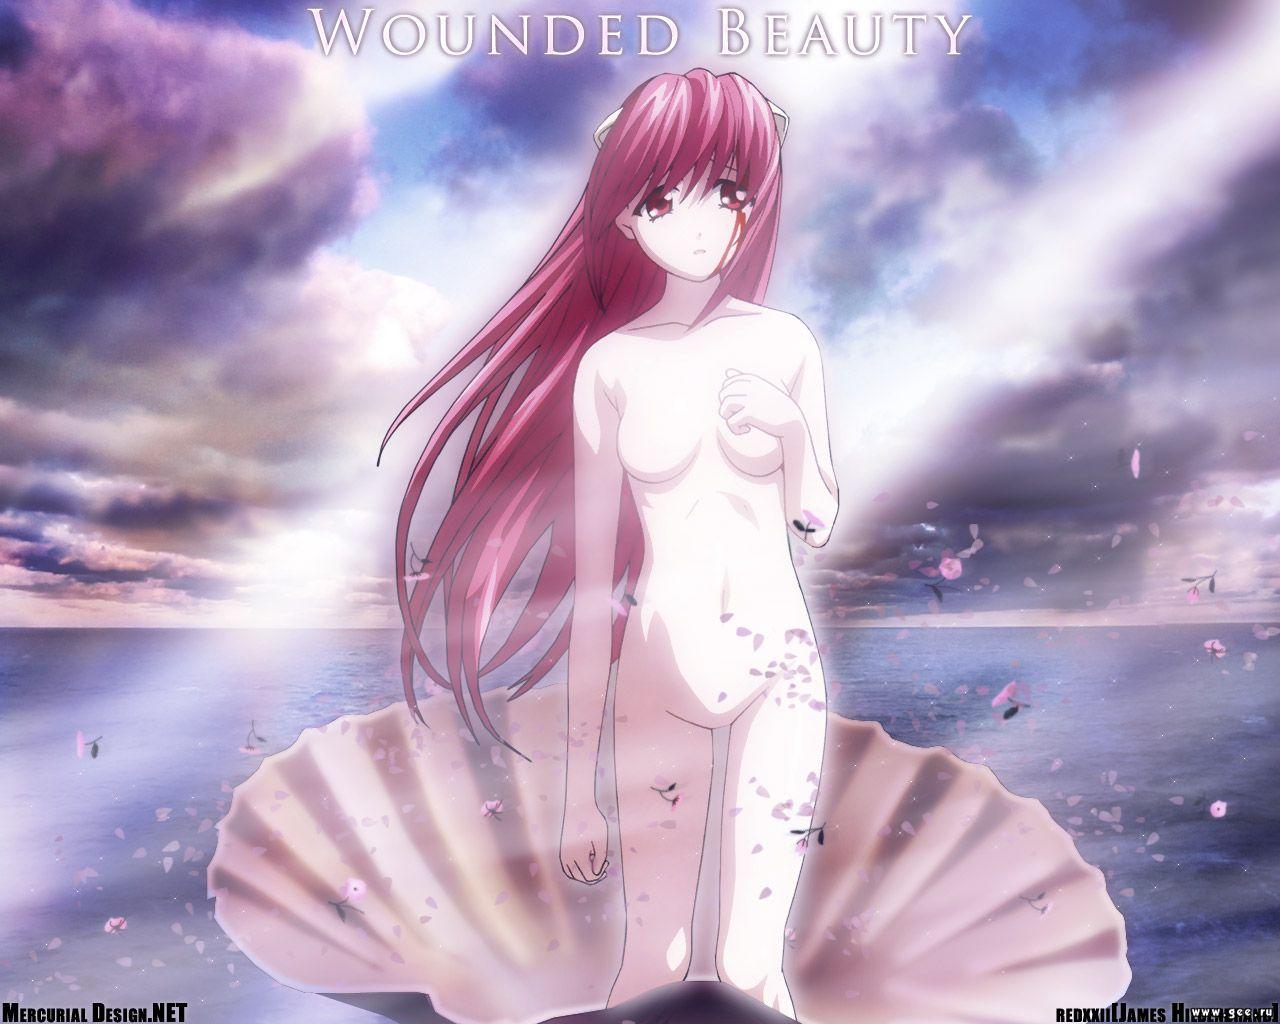 Wallpaper wounded beauty Soft